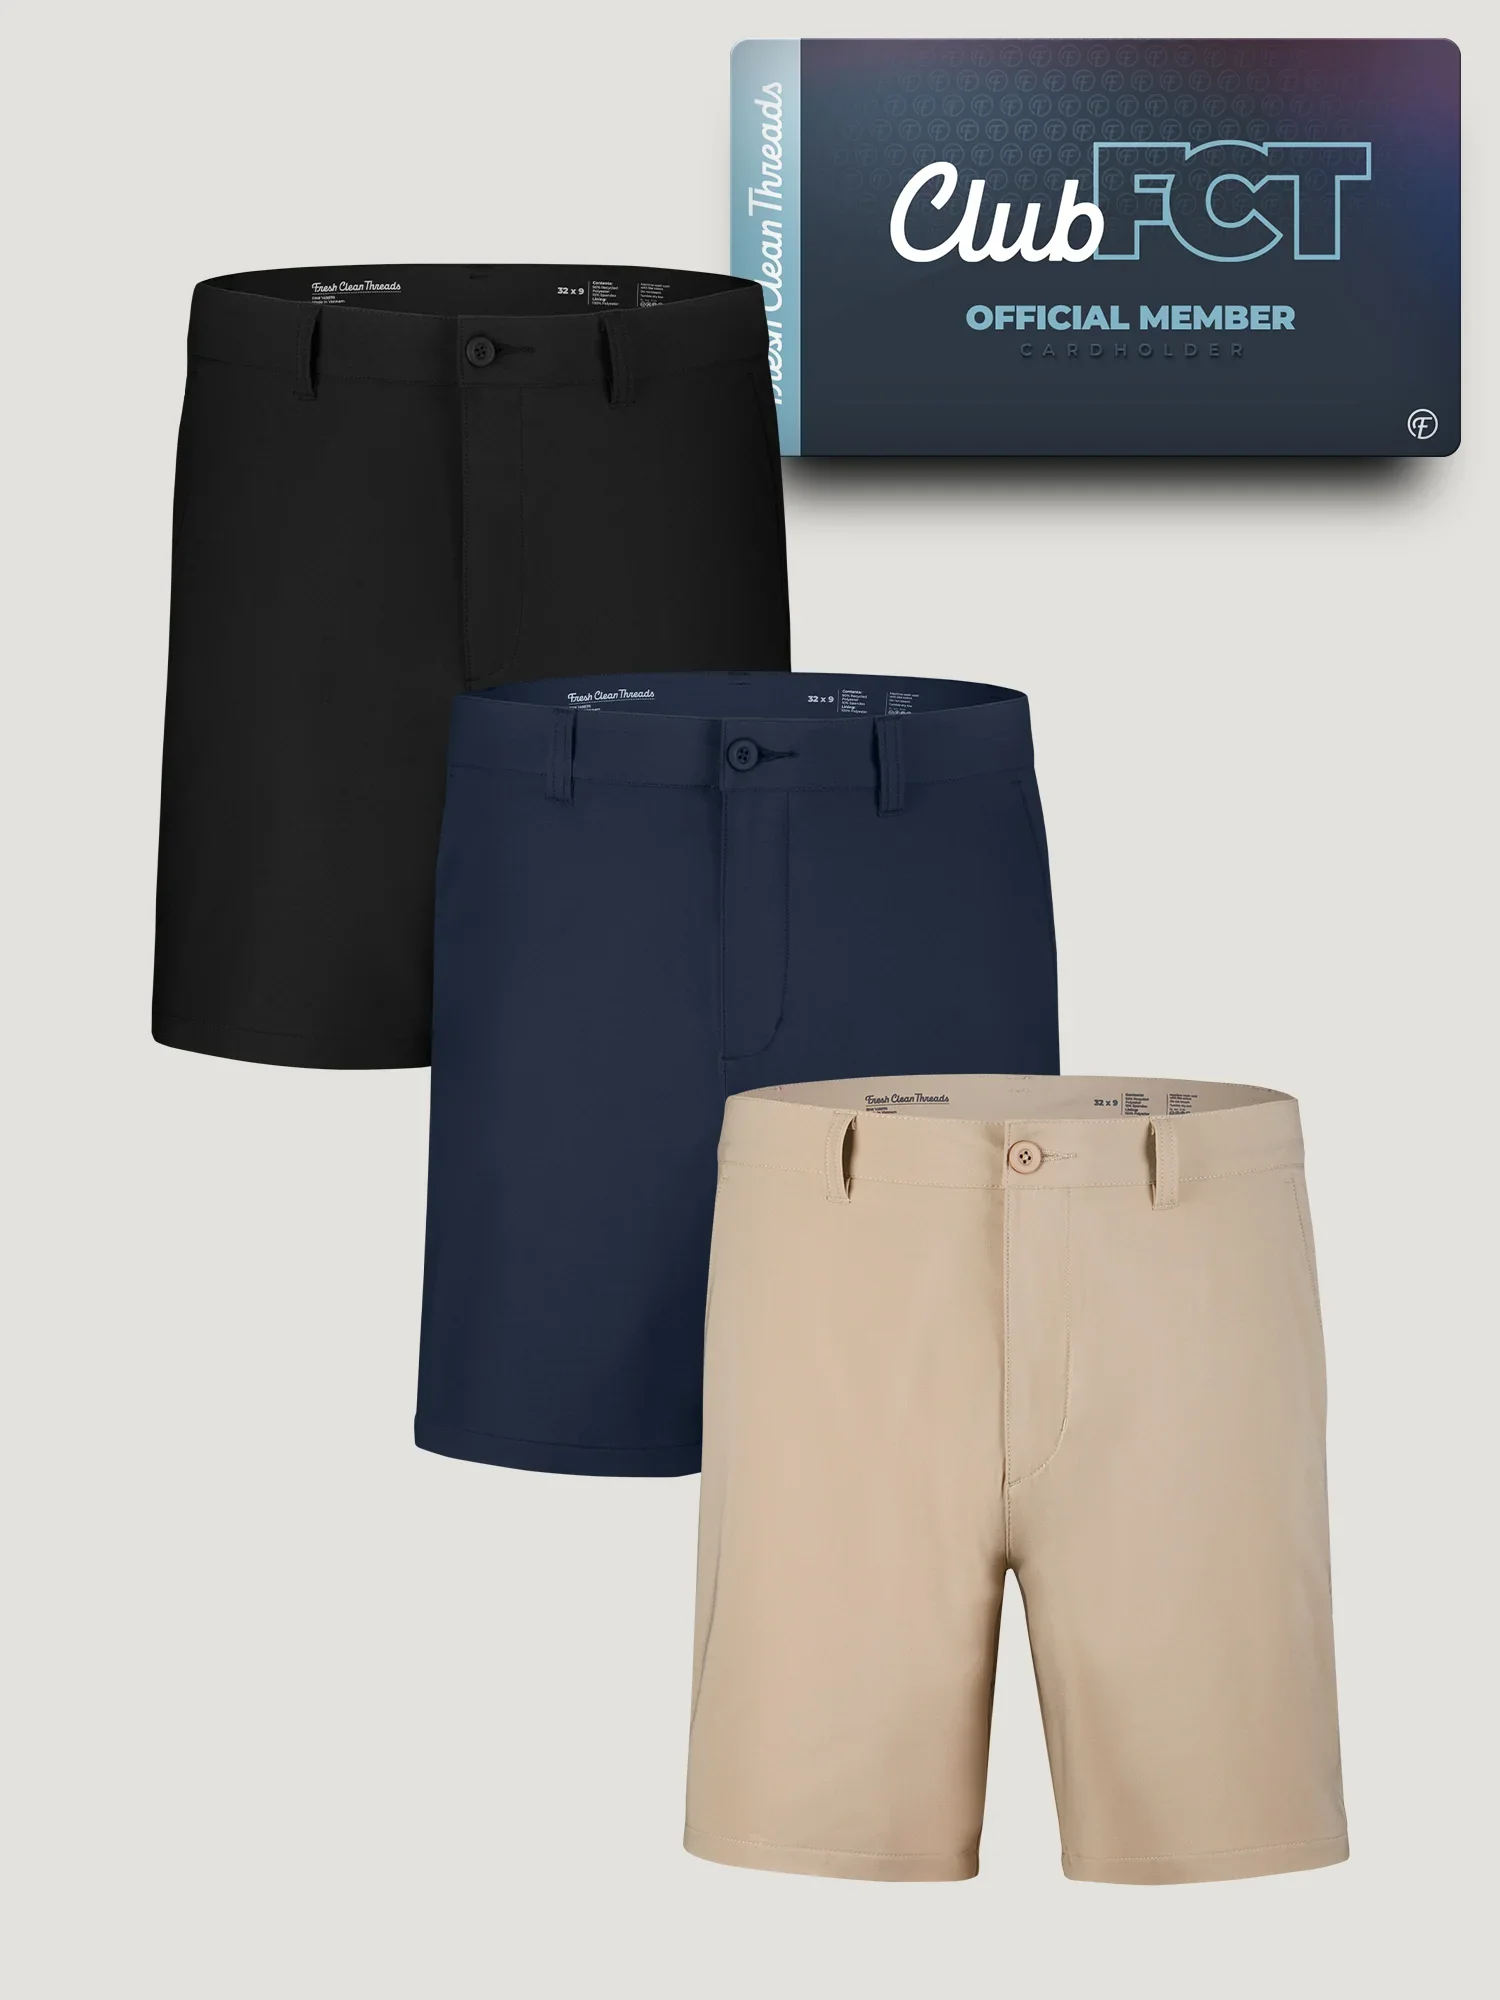 Image of Everyday Shorts 2.0 Best Sellers Member 3-Pack